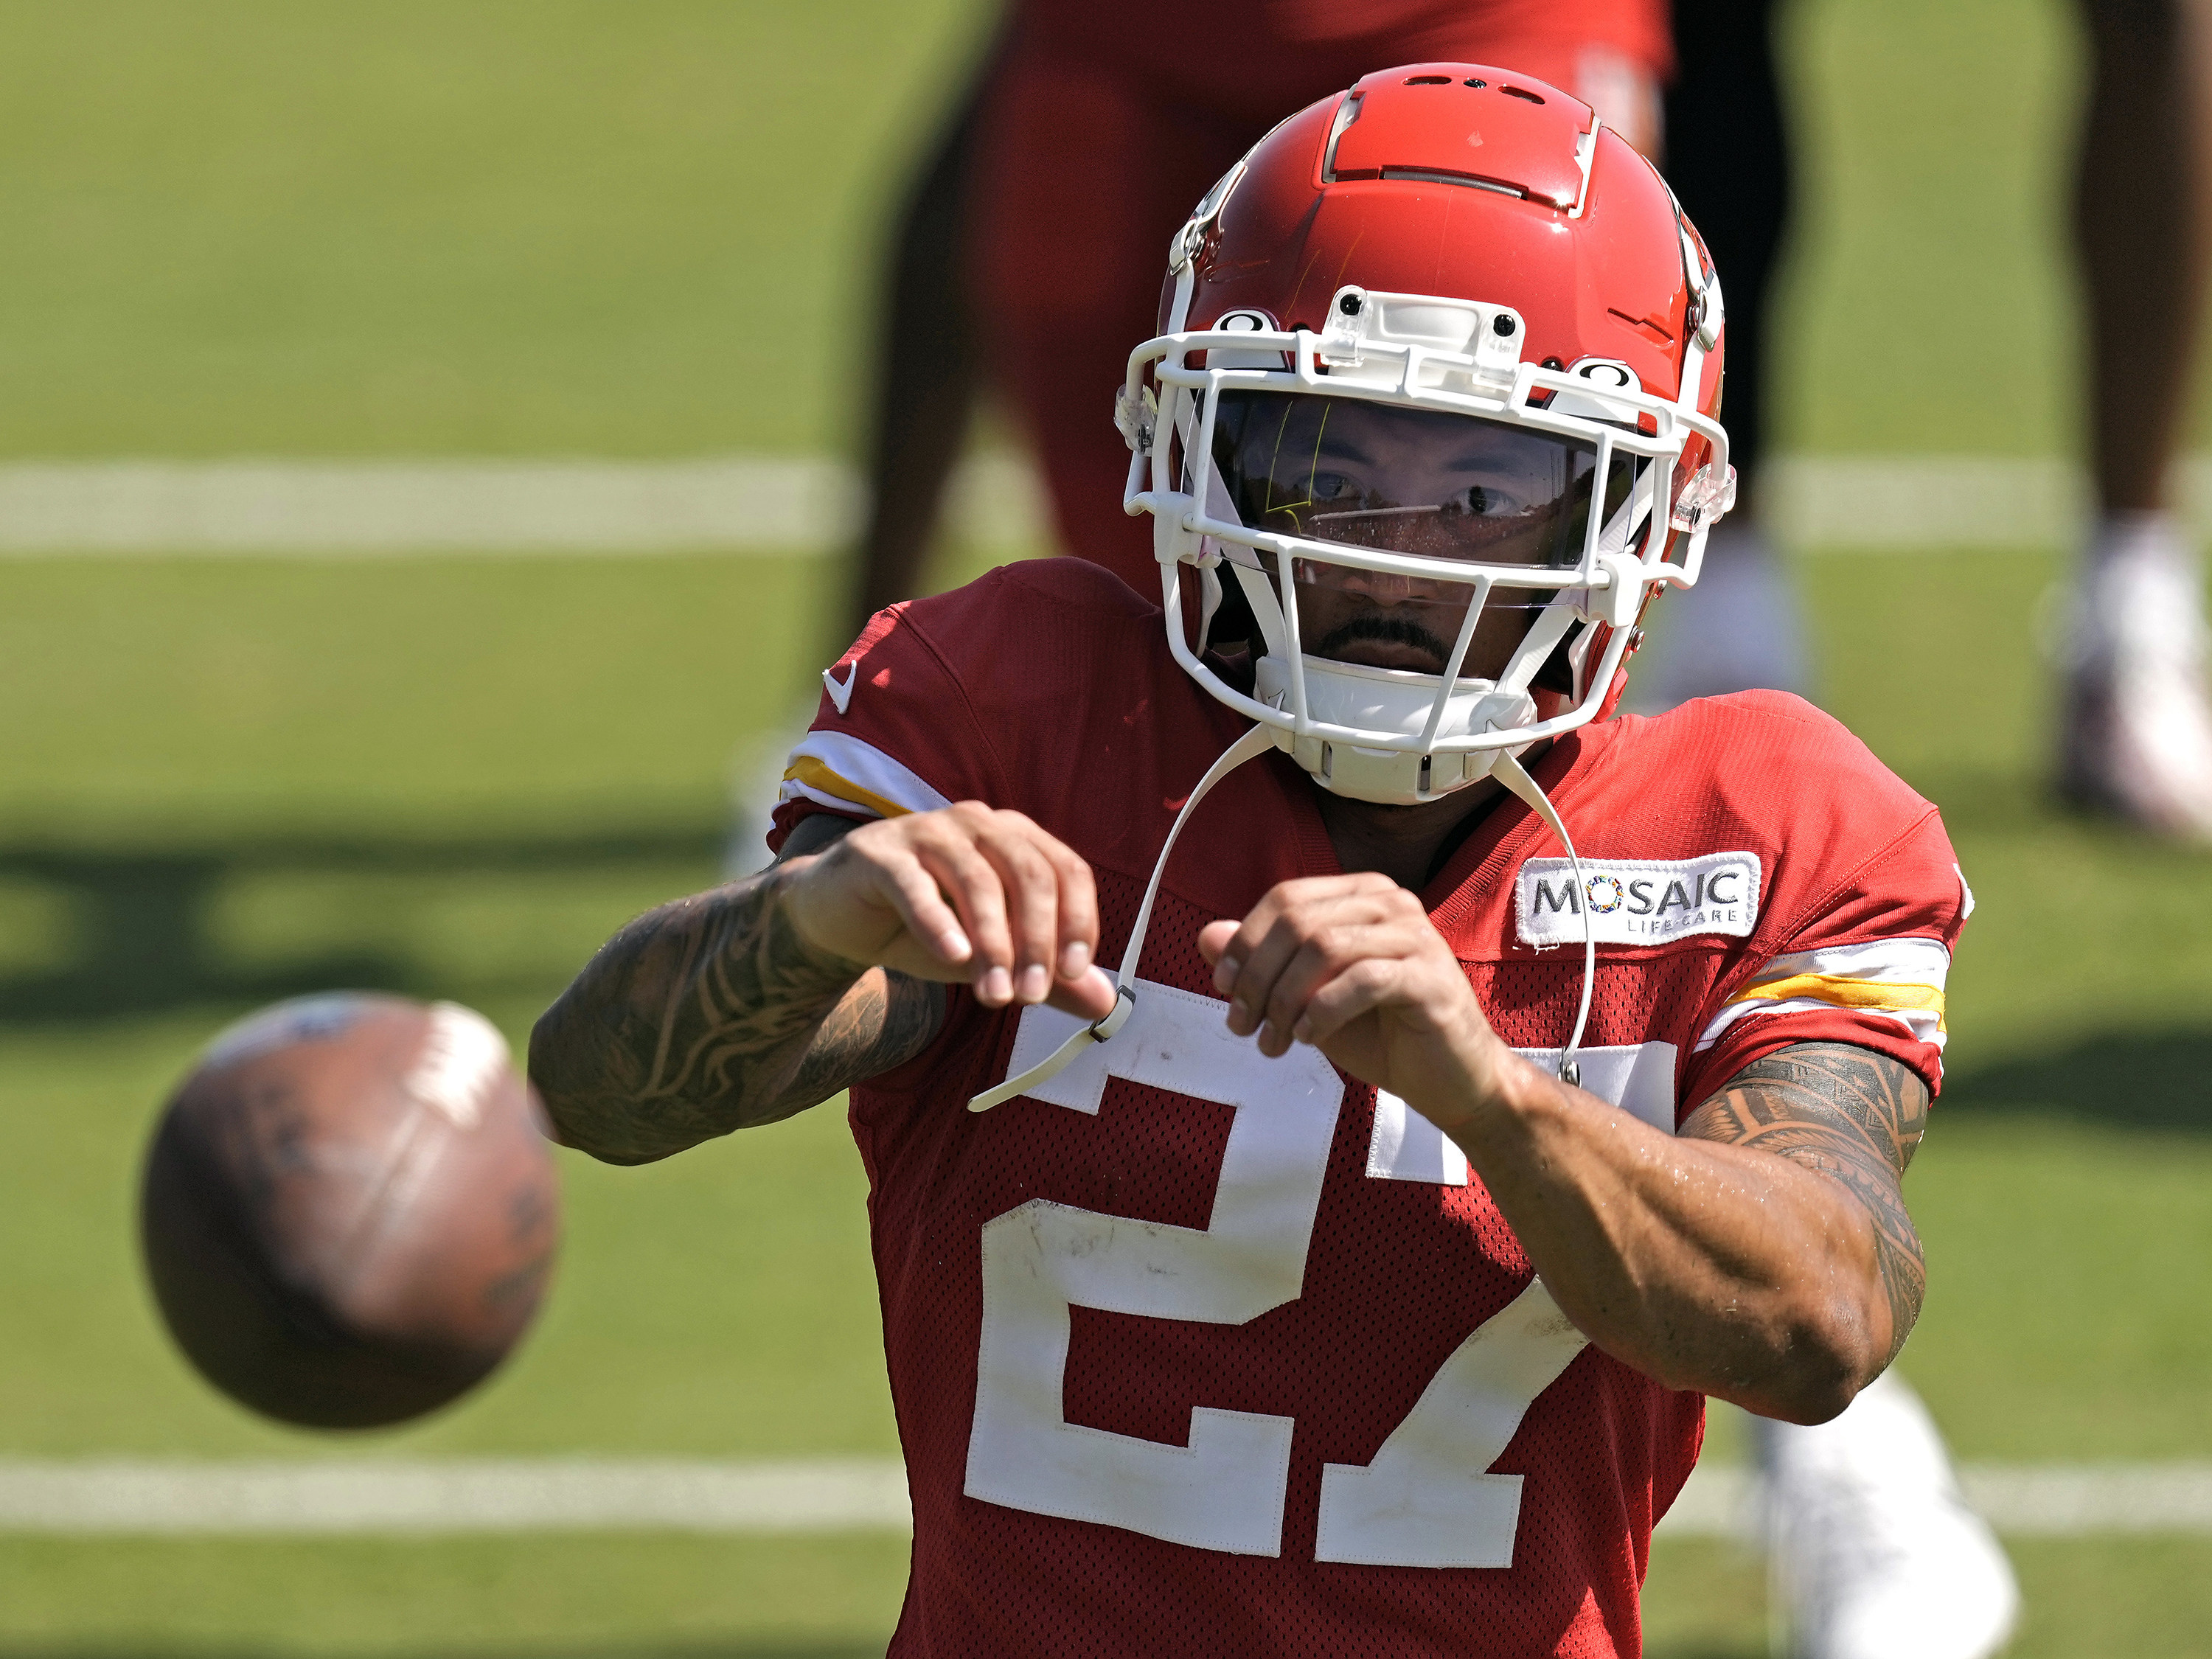 Kansas City Chiefs wide receiver Nikko Remigio catches a ball after NFL football training camp. Photo: AP